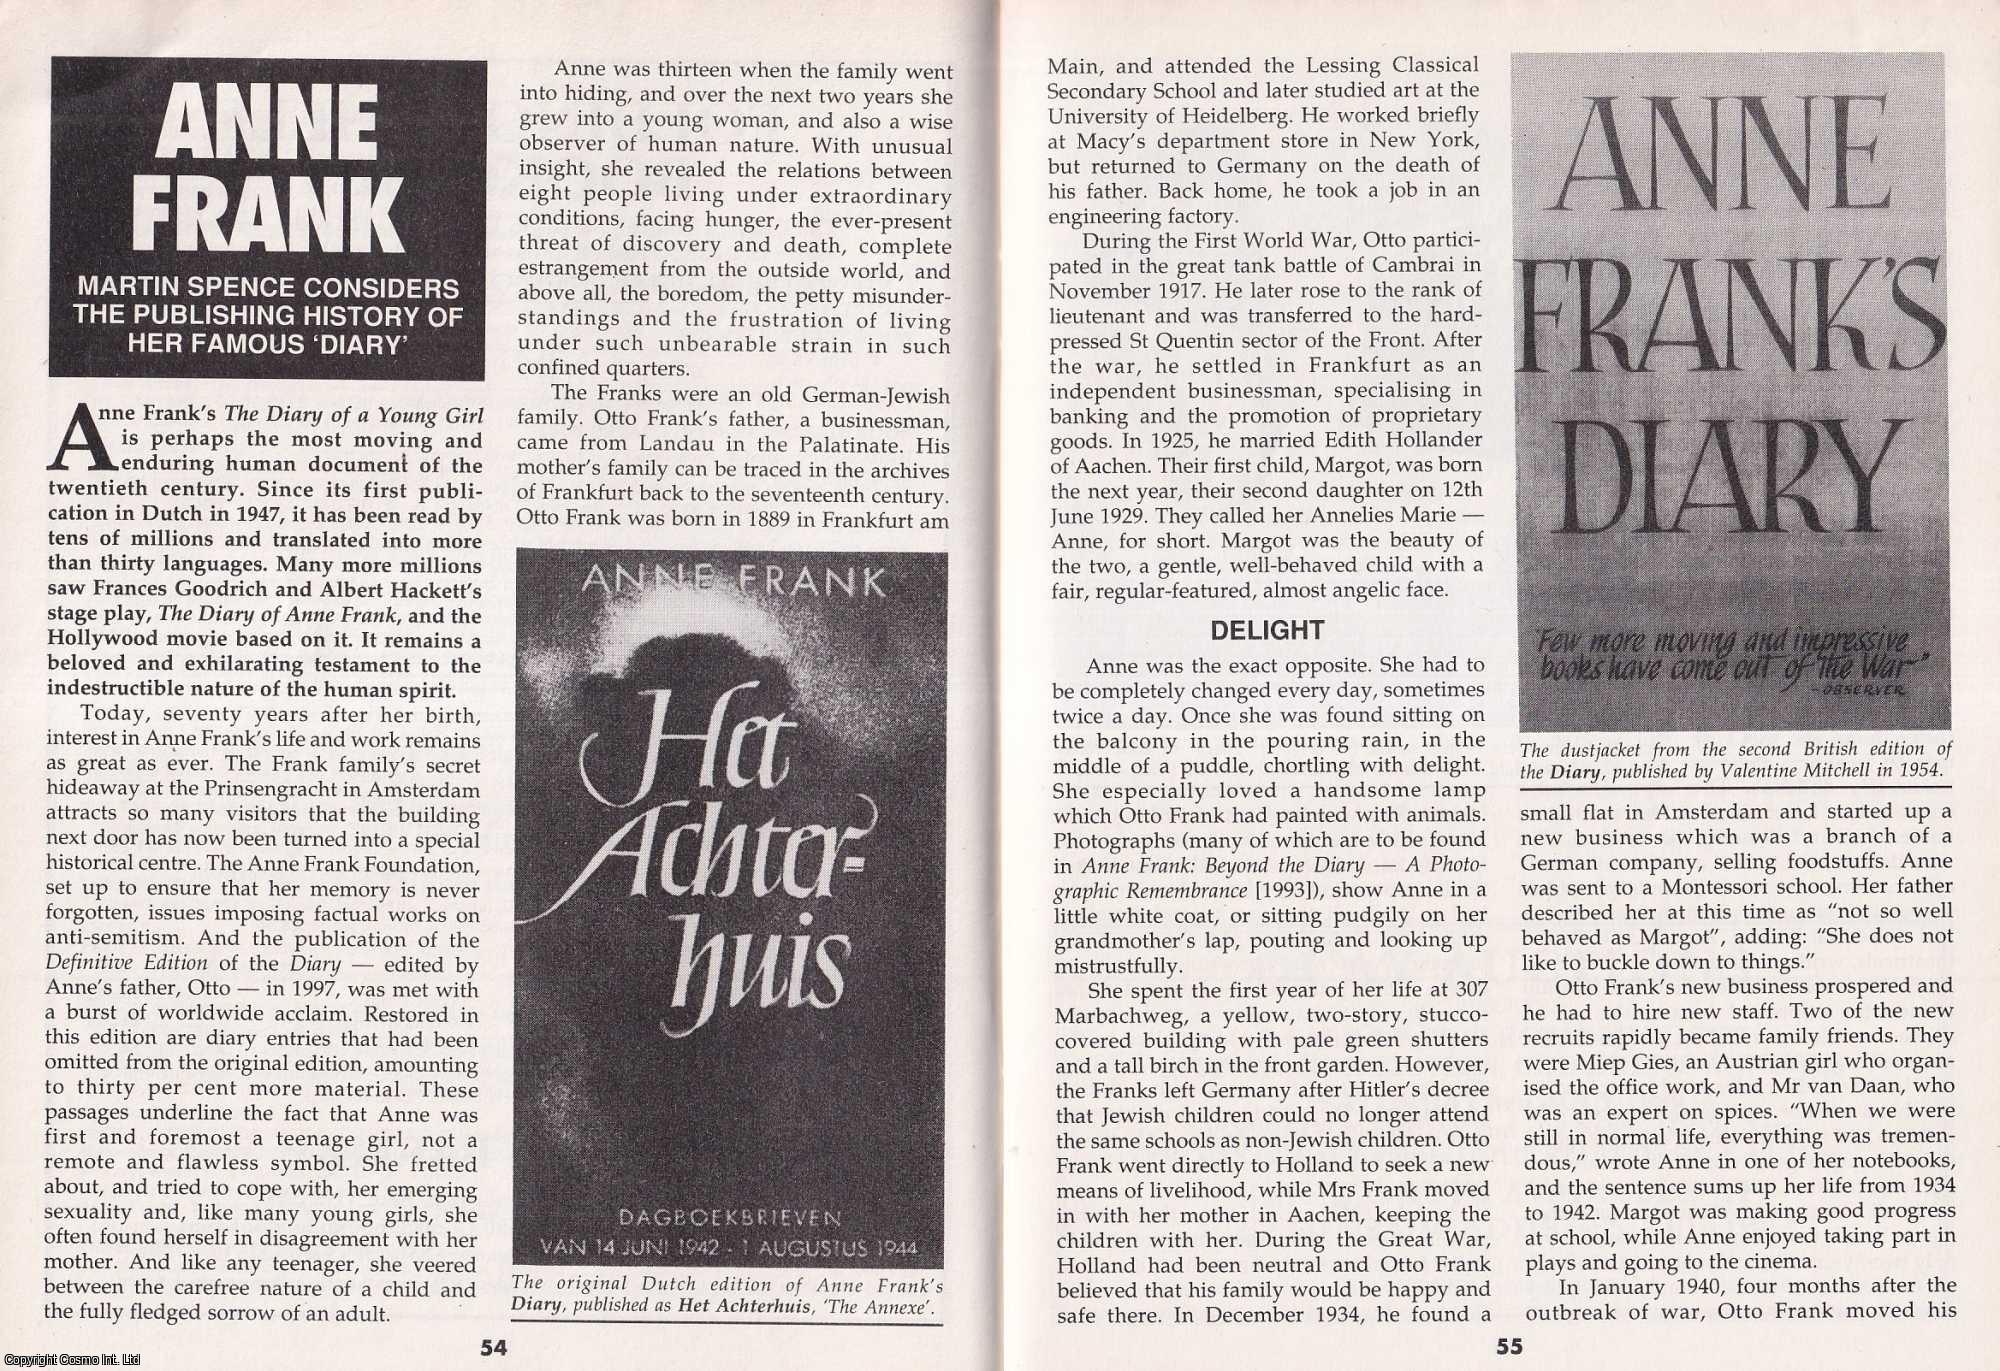 Martin Spence - Anne Frank. Considering The Publishing History of her Famous Diary. This is an original article separated from an issue of The Book & Magazine Collector publication.